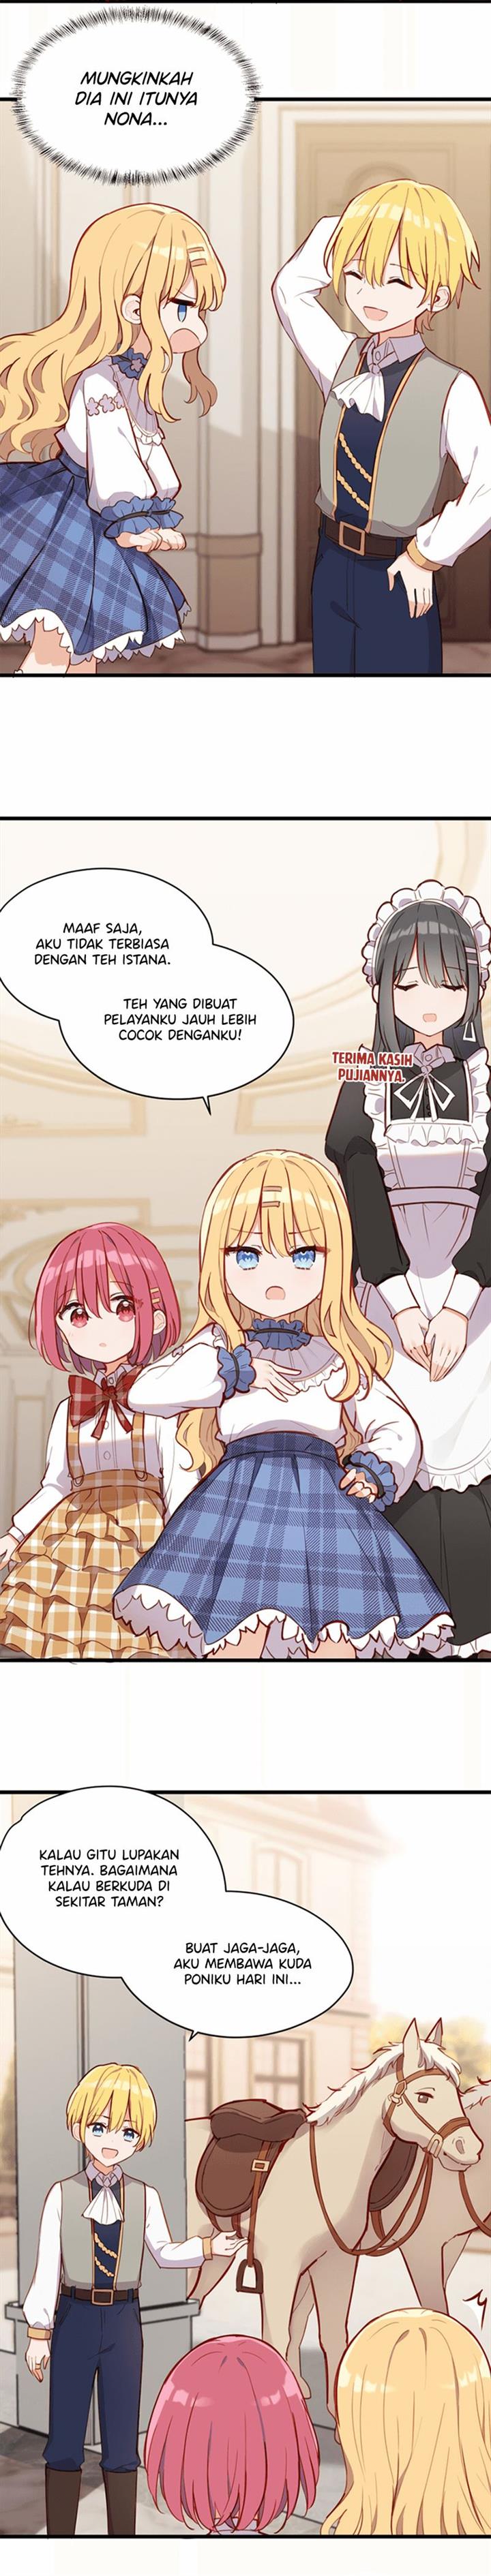 Please Bully Me, Miss Villainess! Chapter 73